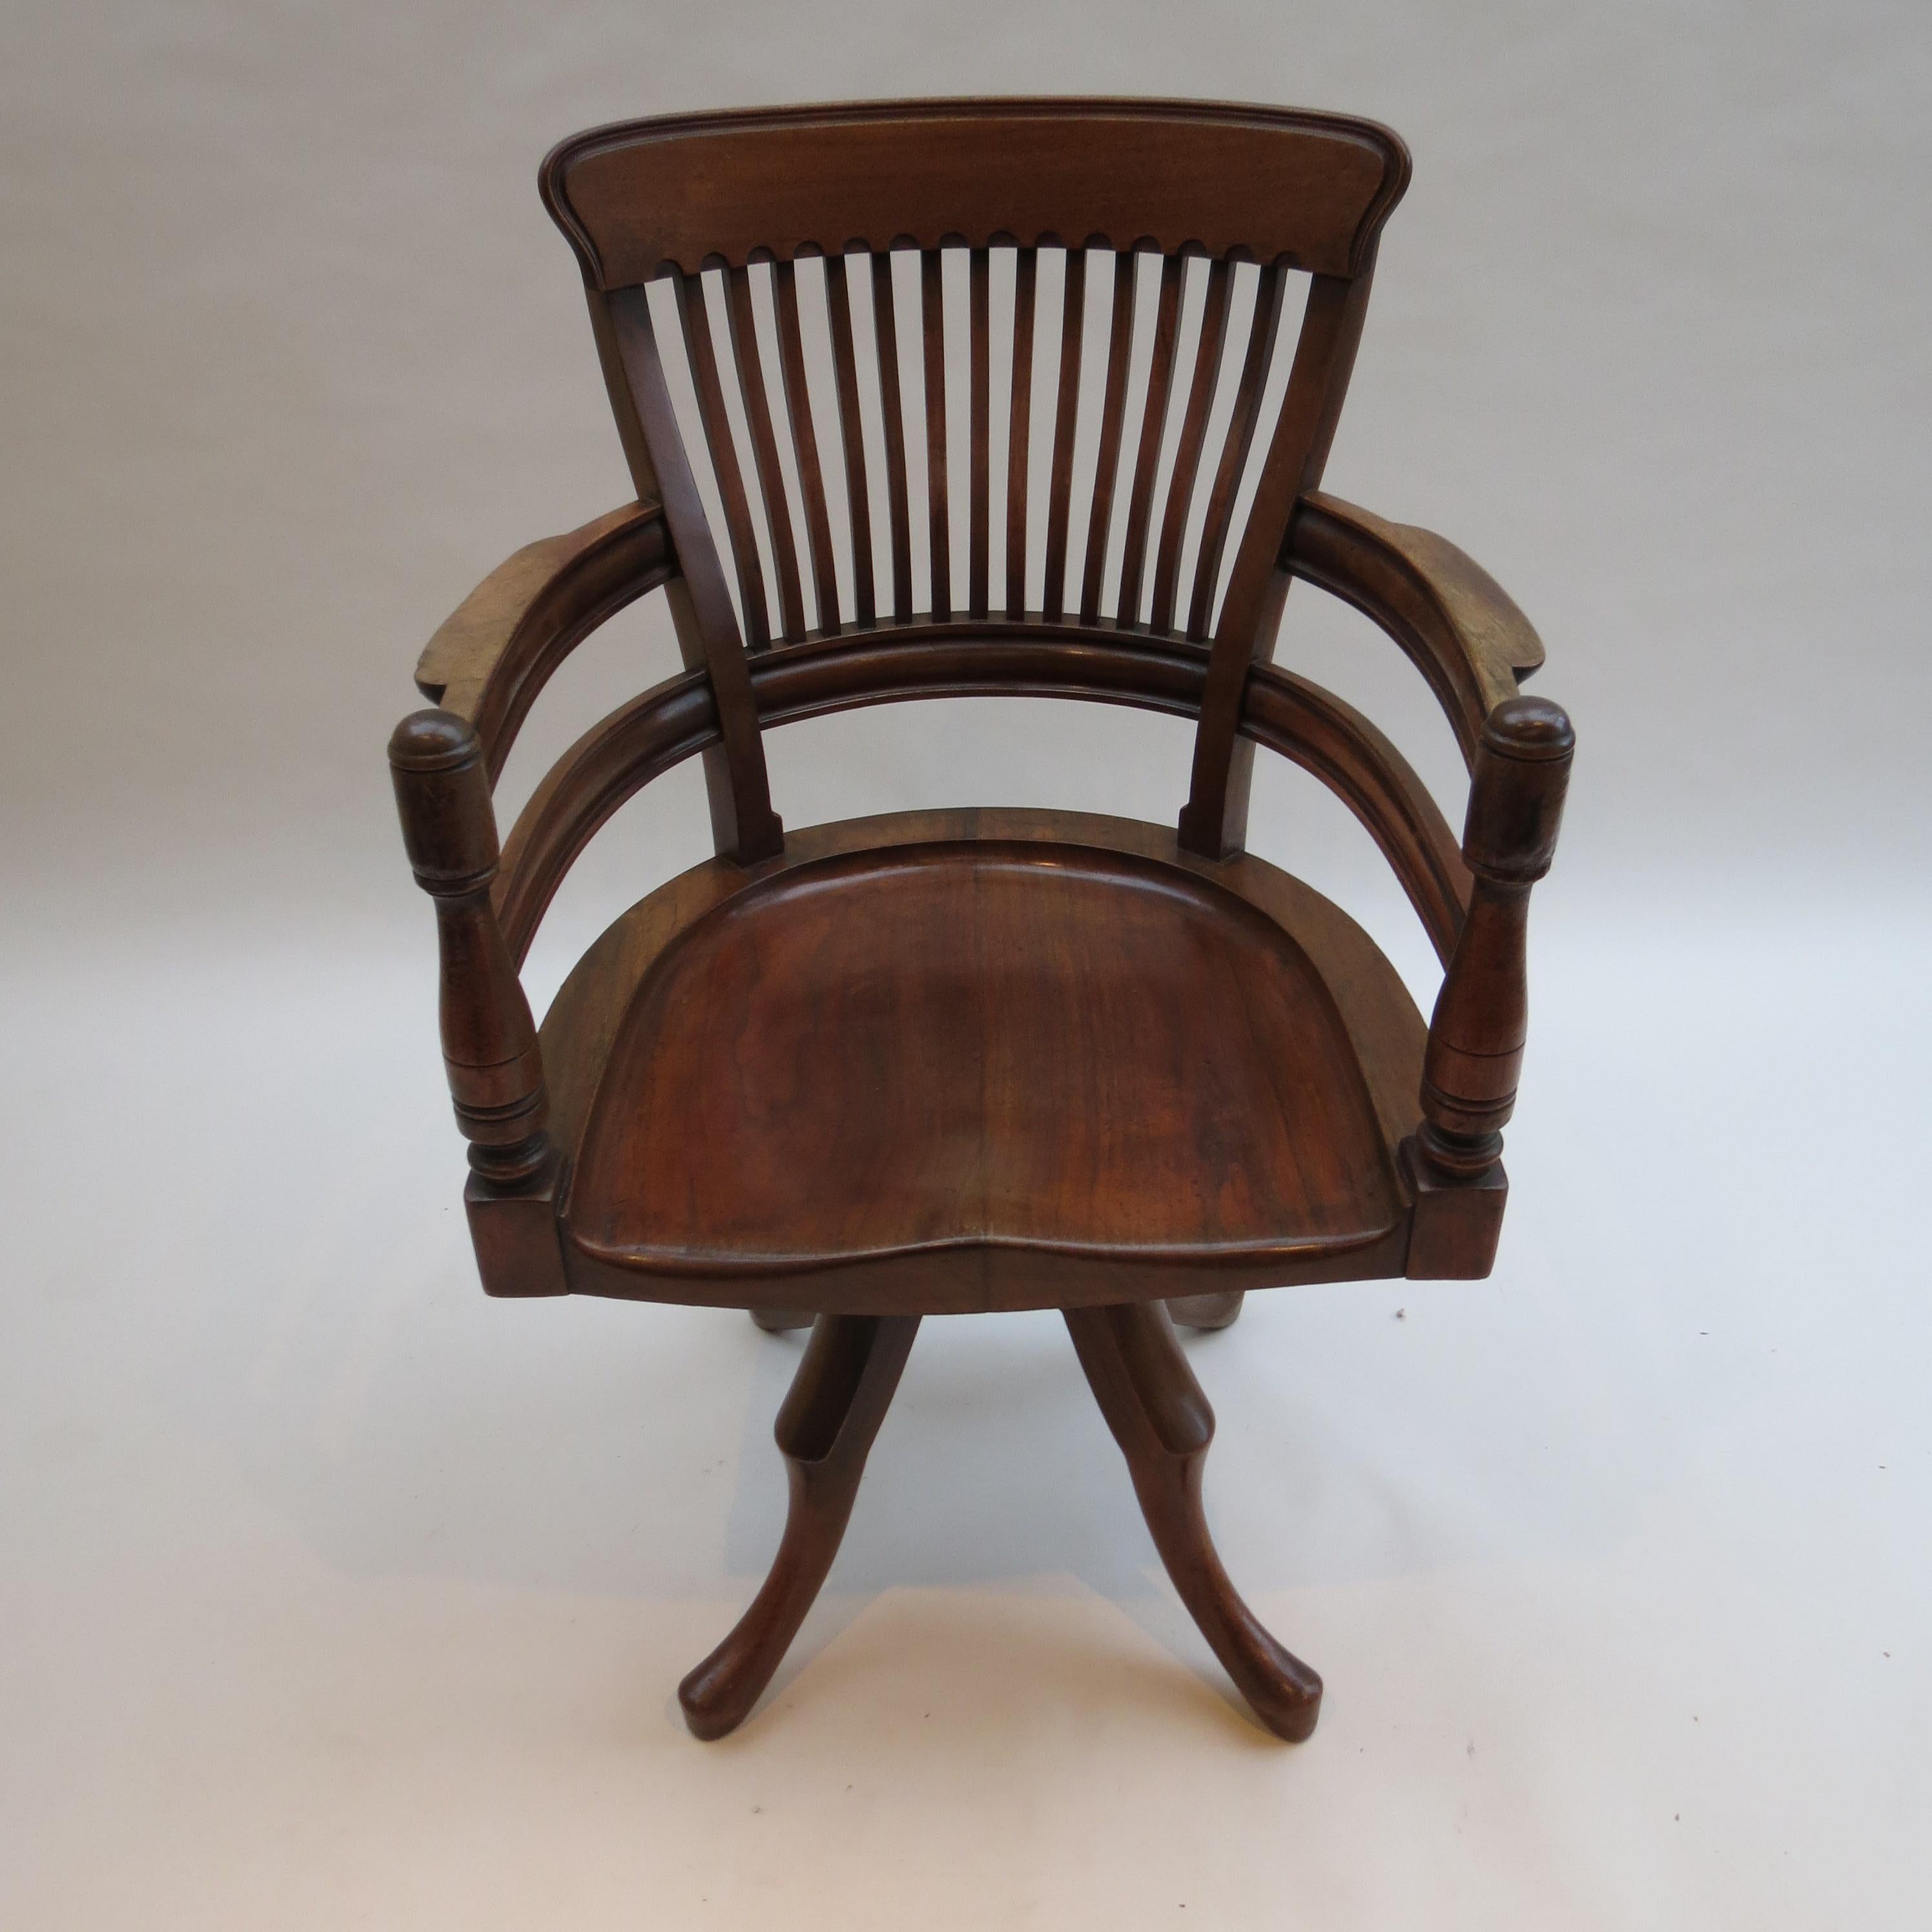 A fine example of this rare swivel office chair, designed by E W Godwin.  Exceptionally well crafted. Made from solid walnut

Retains the original finish. Beautiful color and patination.

In good overall condition, usual wear as expected.

A